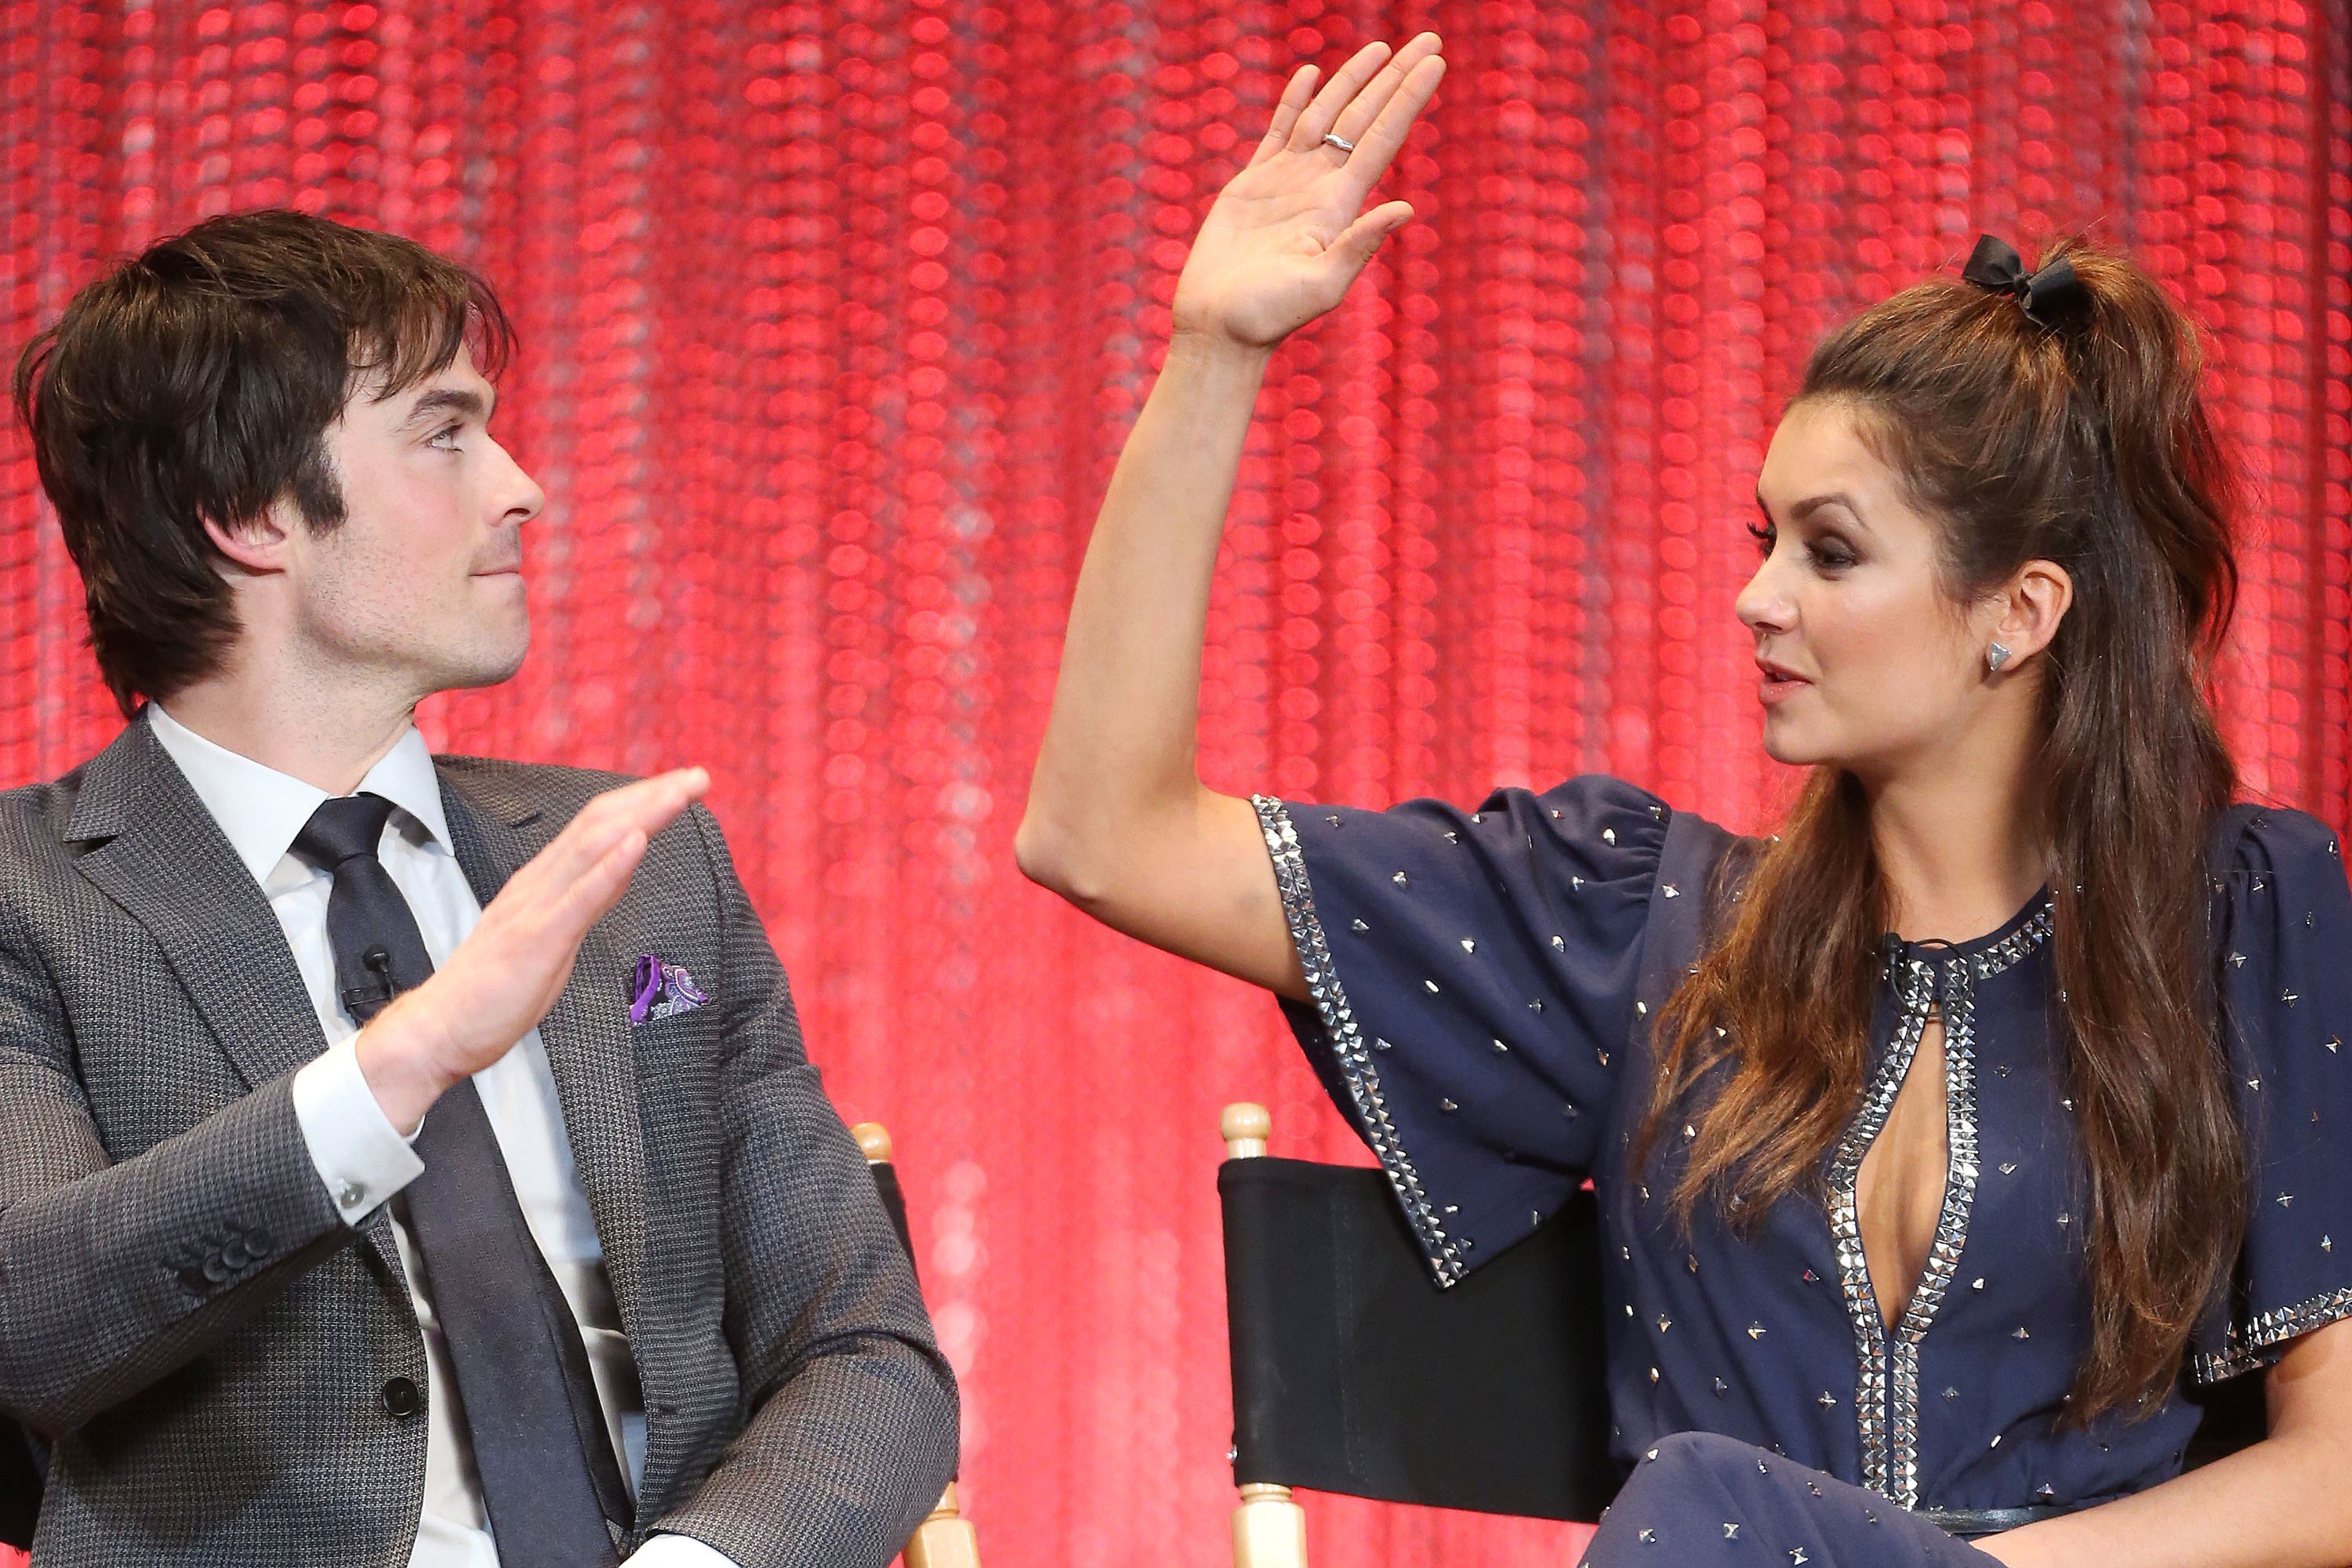 'The Vampire Diaries' stars Ian Somerhalder and Nina Dobrev raise their hands to high five. Somerhalder wears a gray suit over a white button-up shirt and black tie. Dobrev wears a blue dress with silver studs.